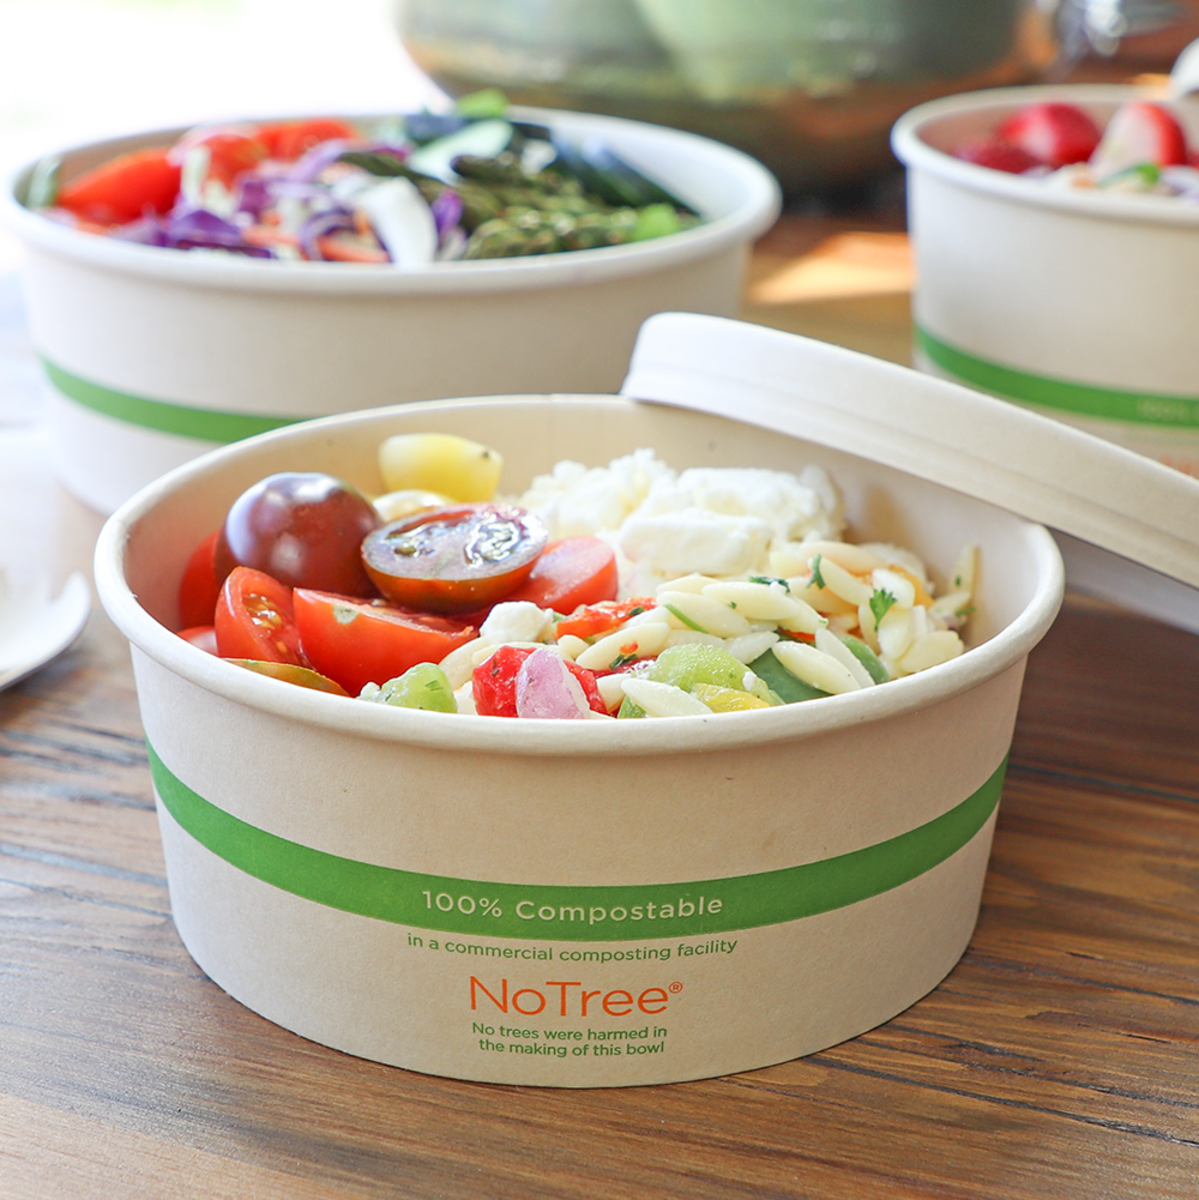 To-Go Bowls with Lids: Buy in Bulk